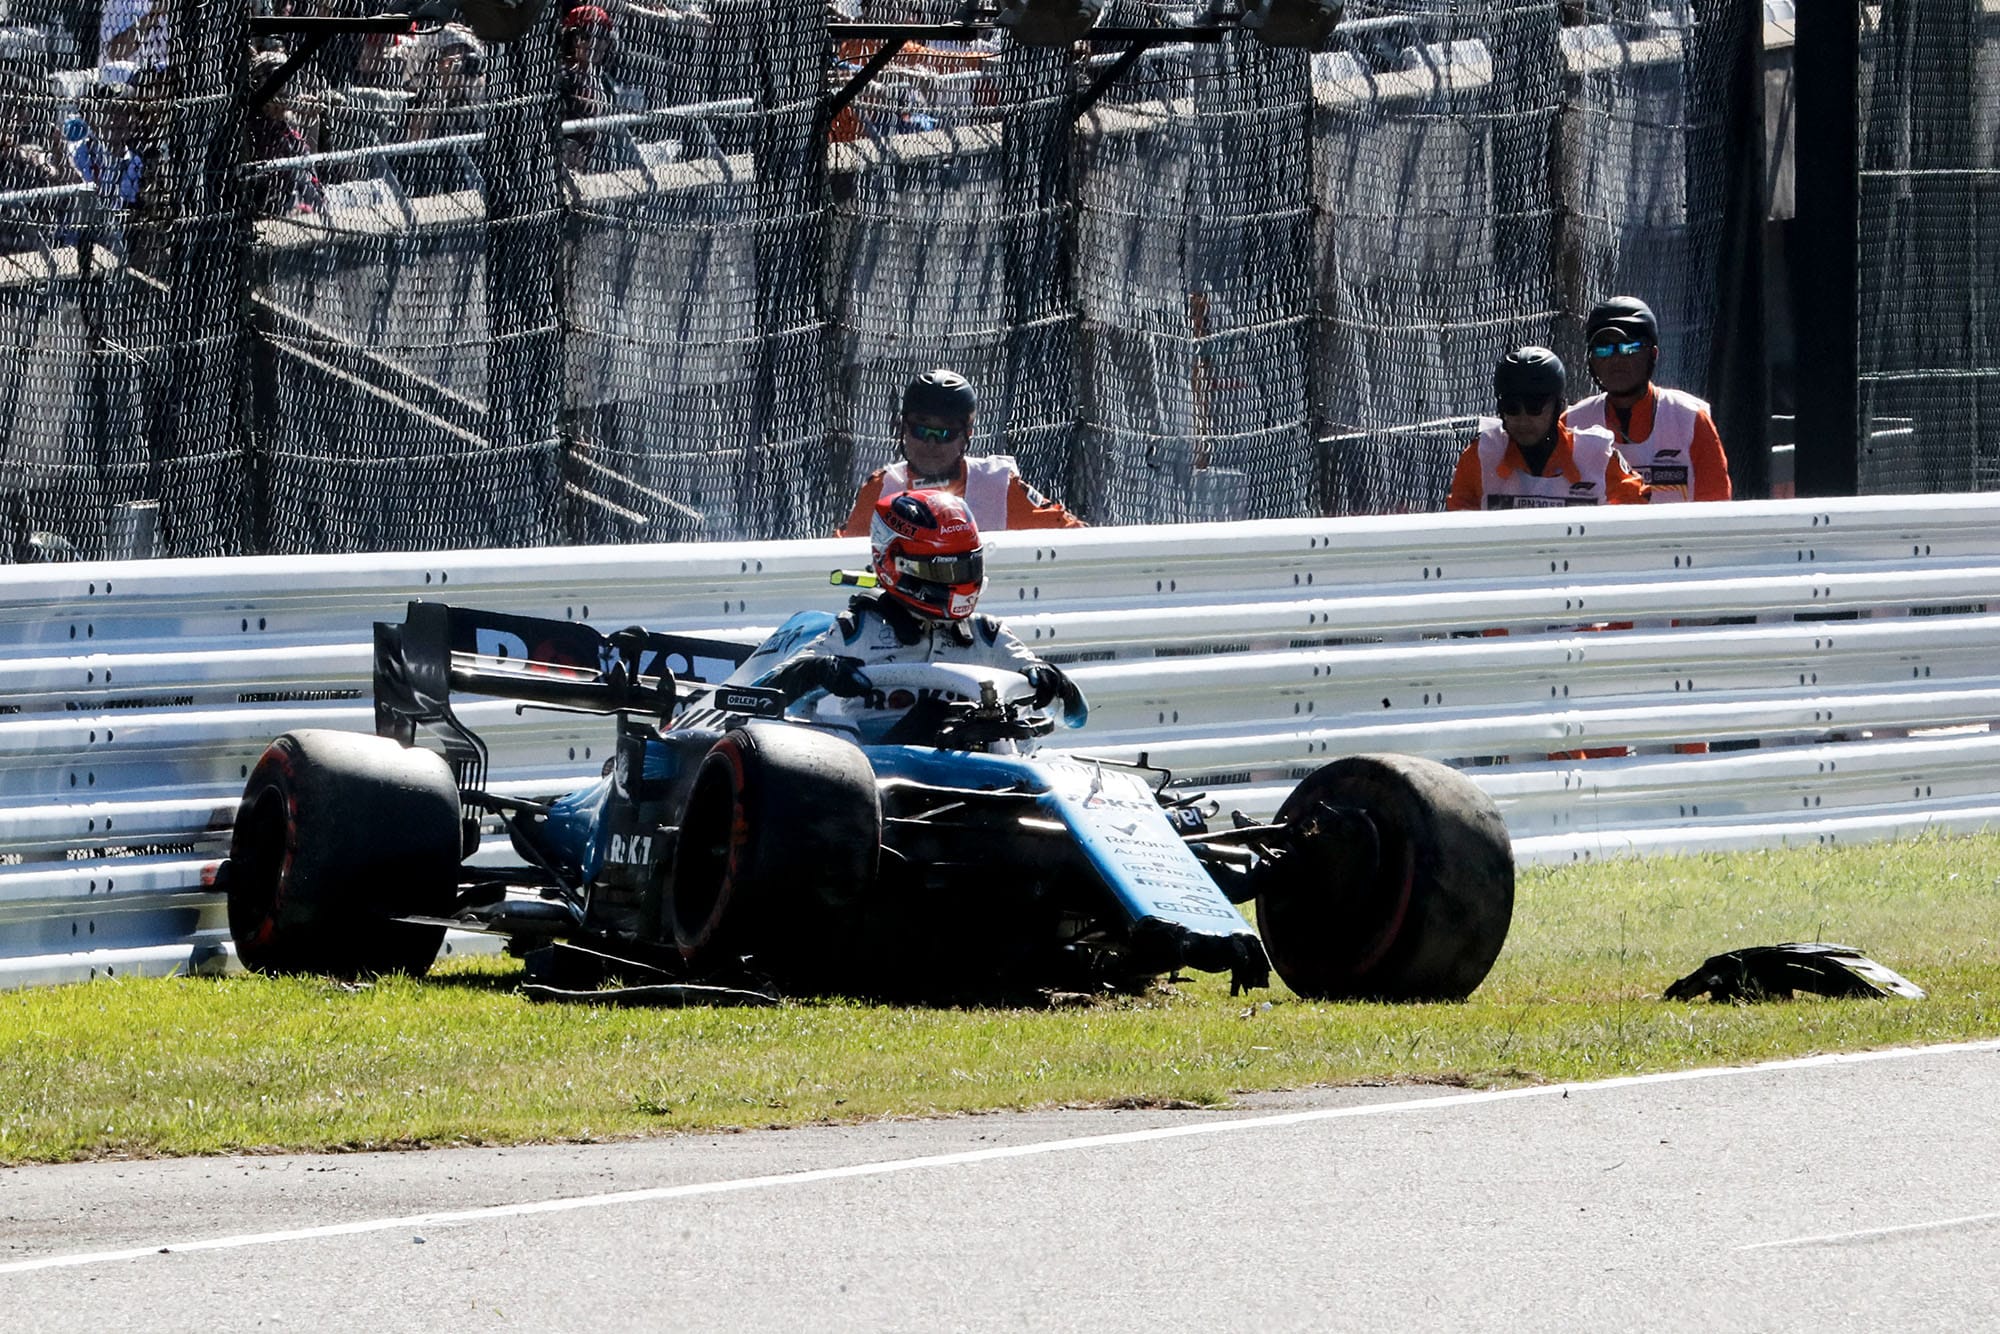 Robert Kubica crashes in qualifying for the 2019 f1 Japanese Grand Prix